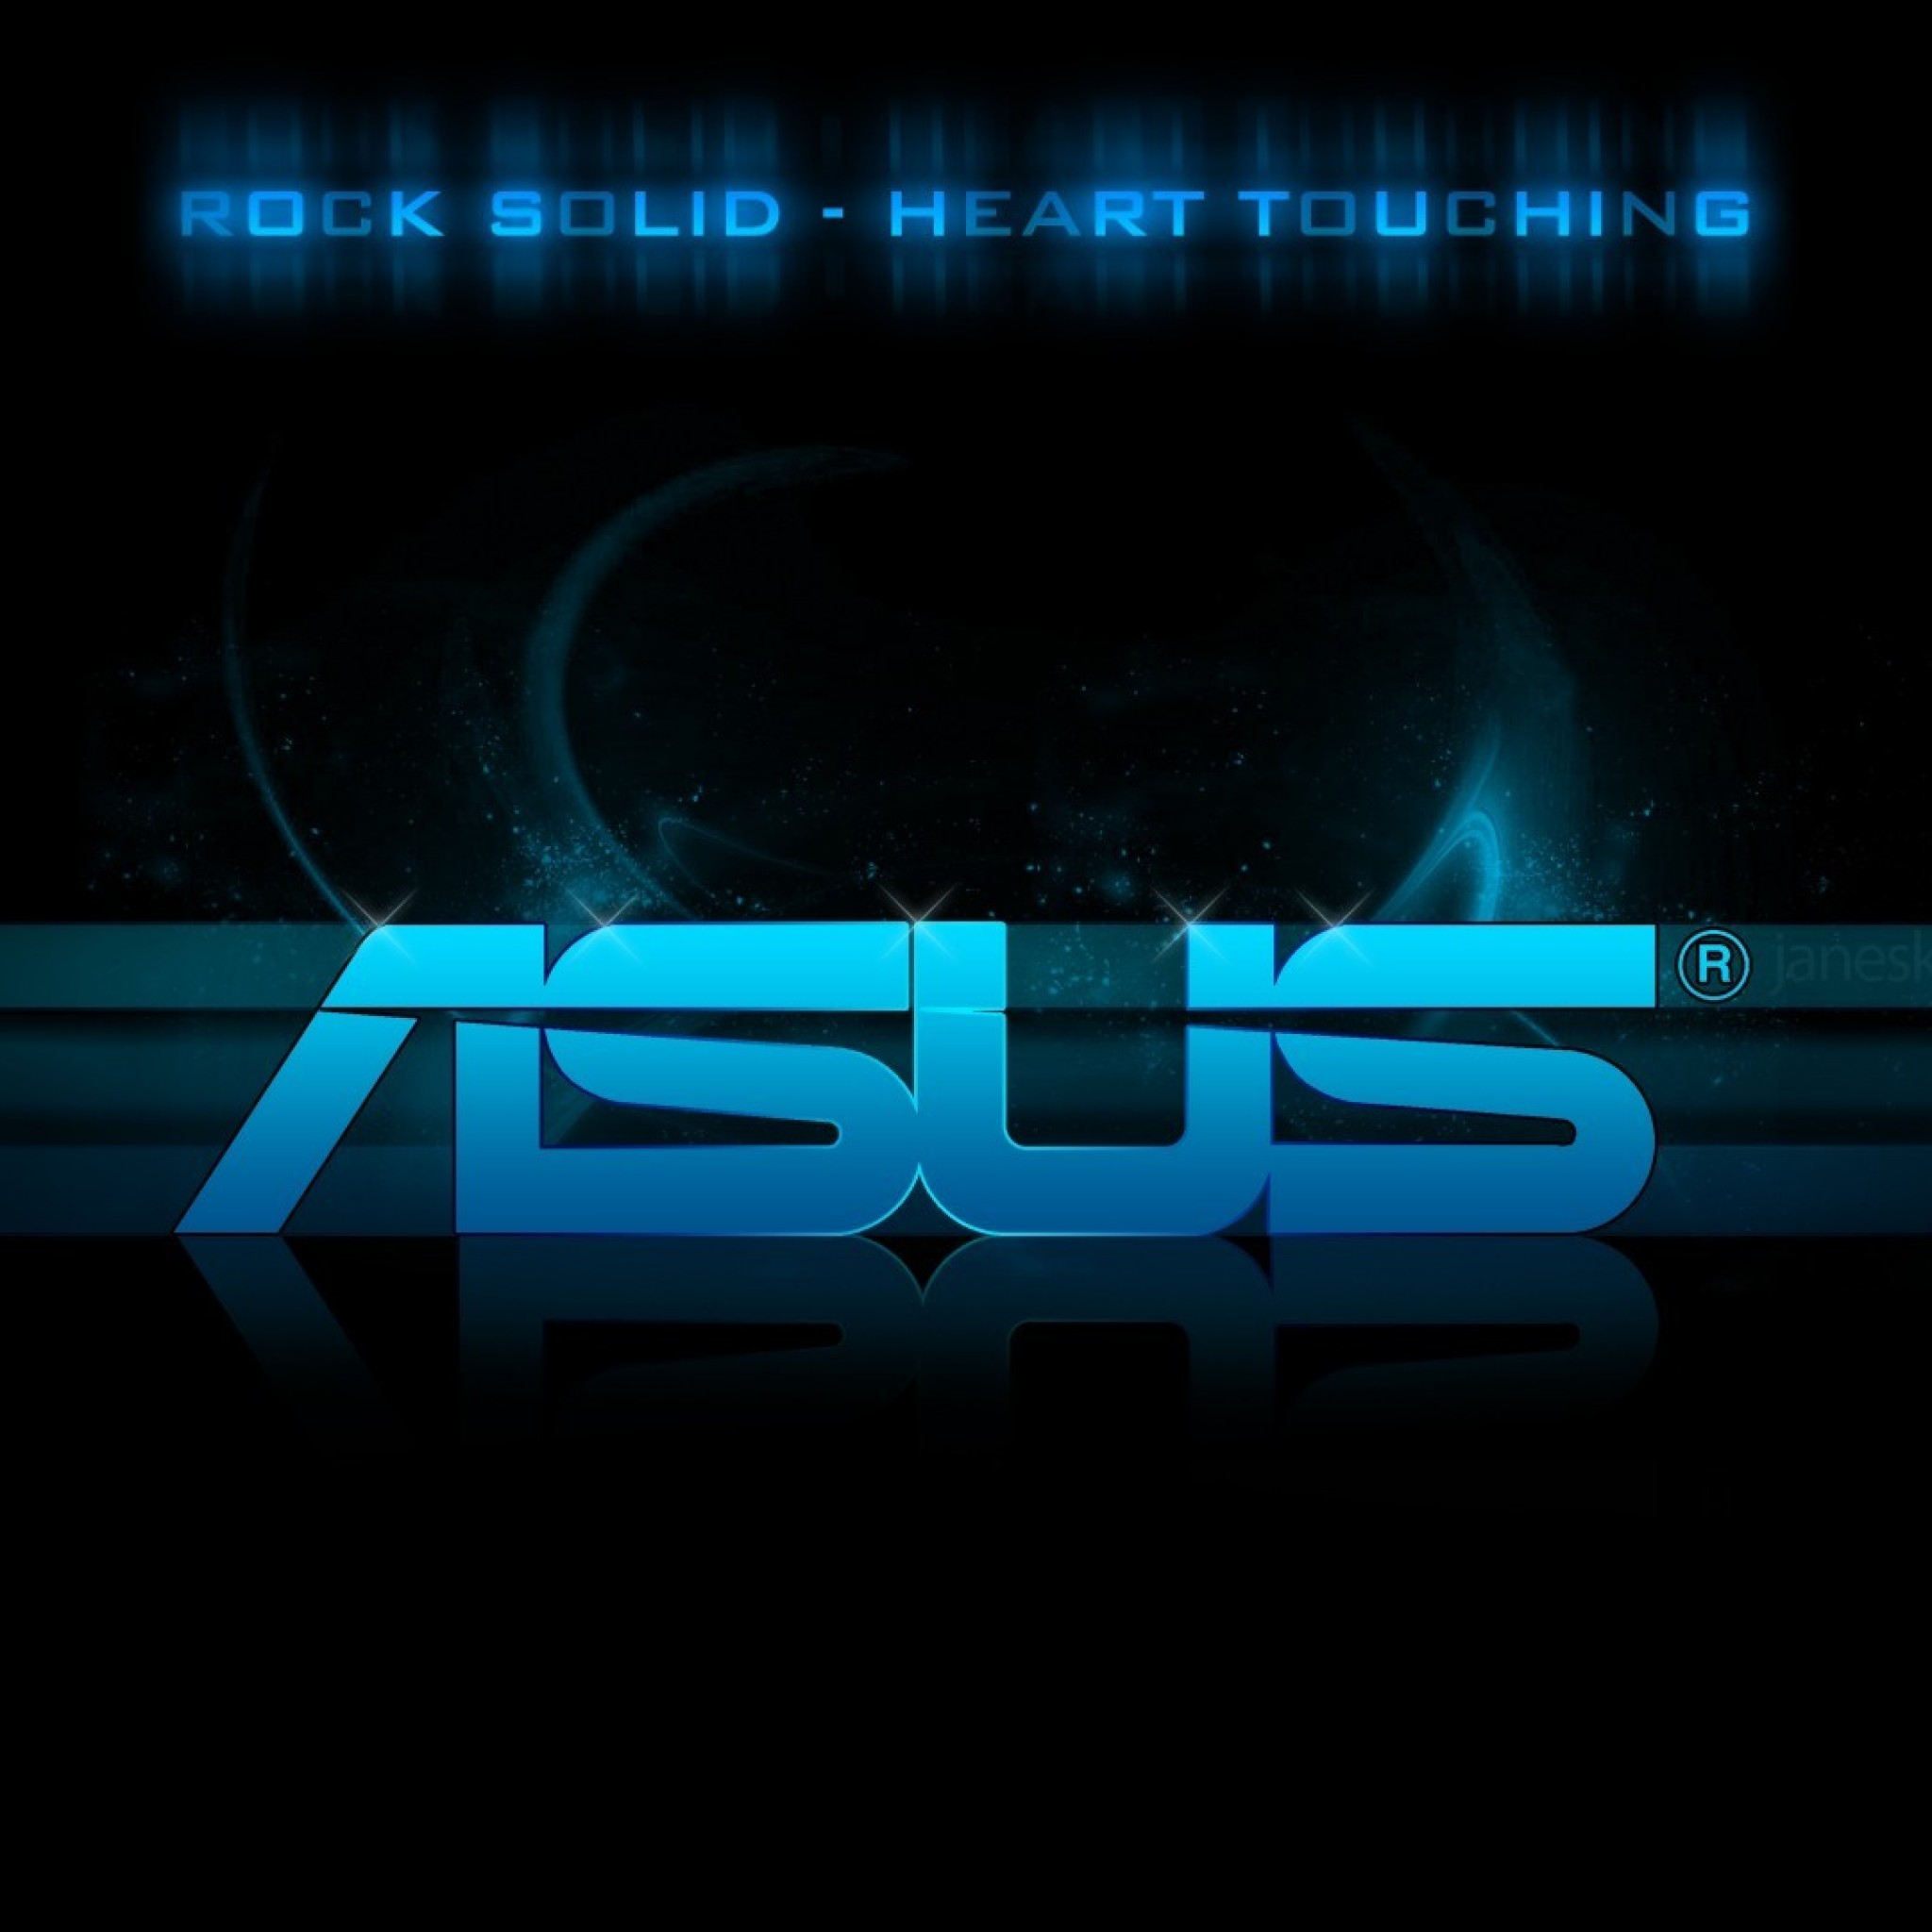 Asus Blue And Black Hd Wallpaper Wallpapers Online Ipad タブレット壁紙ギャラリー